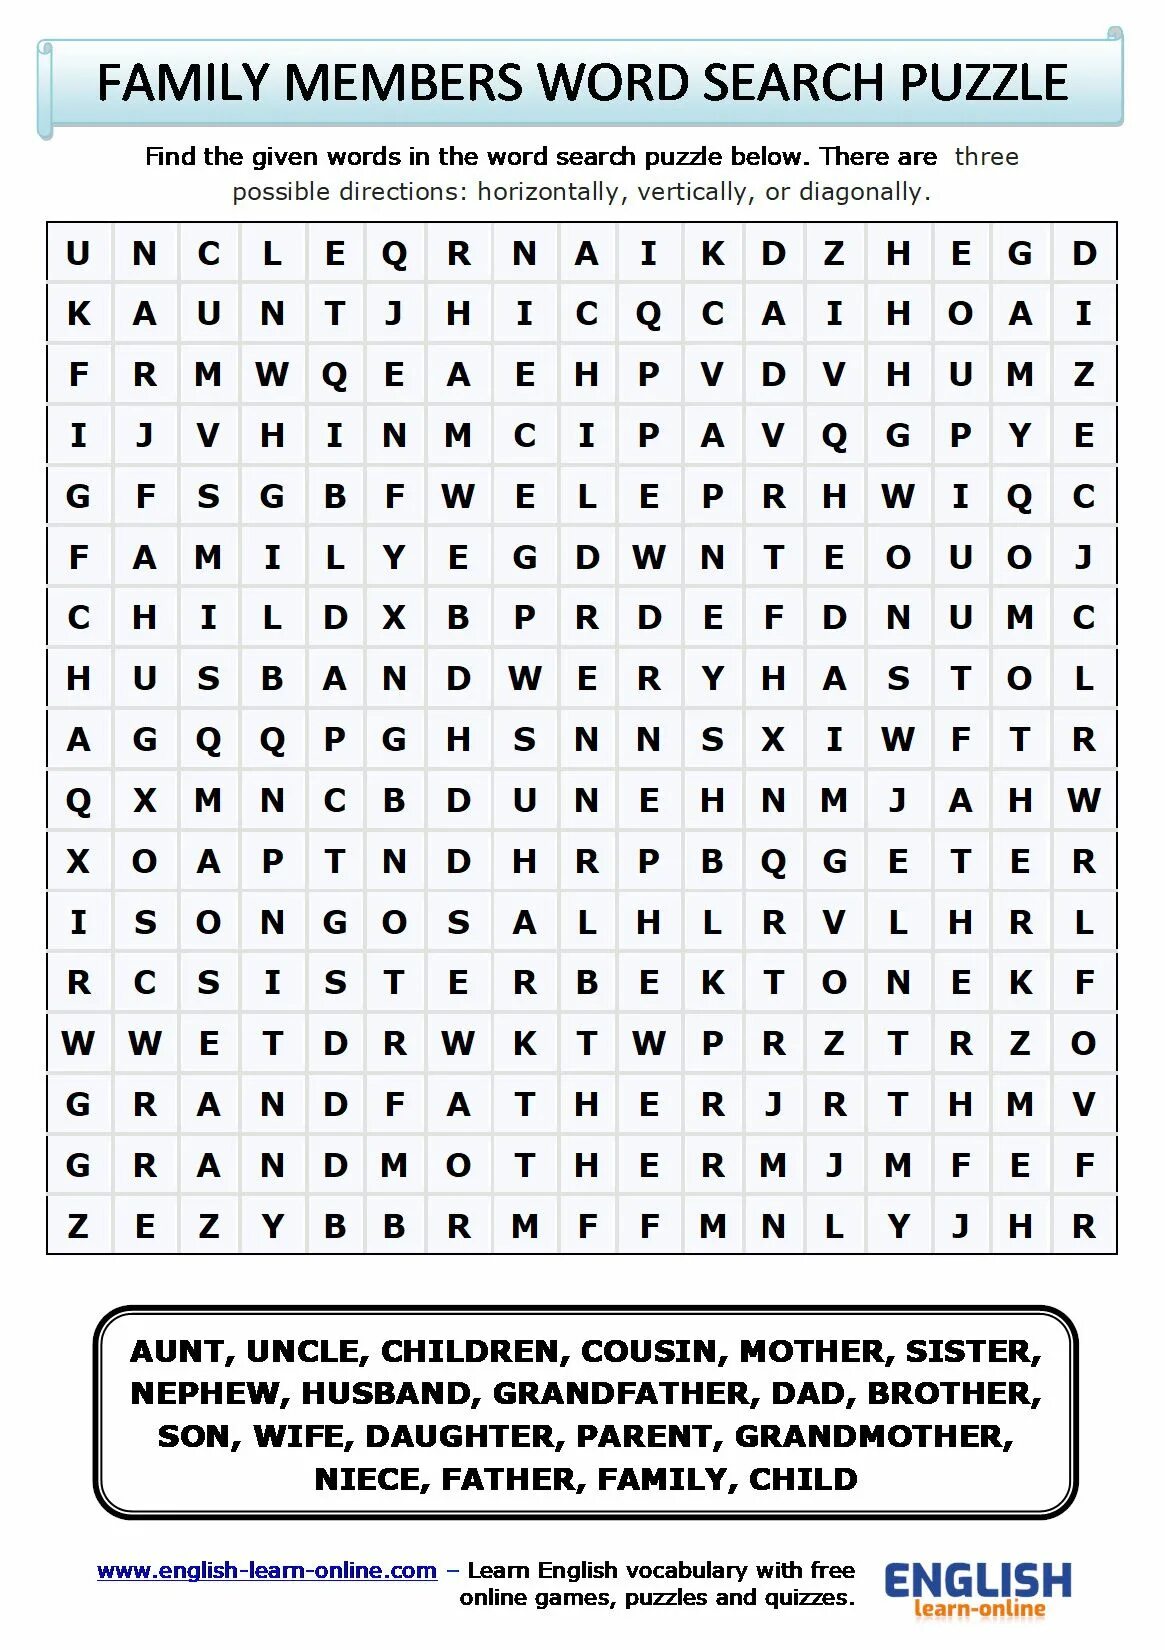 Member answers. Weather Word search. My Family Wordsearch. Family members Wordsearch. Wordsearch погода.